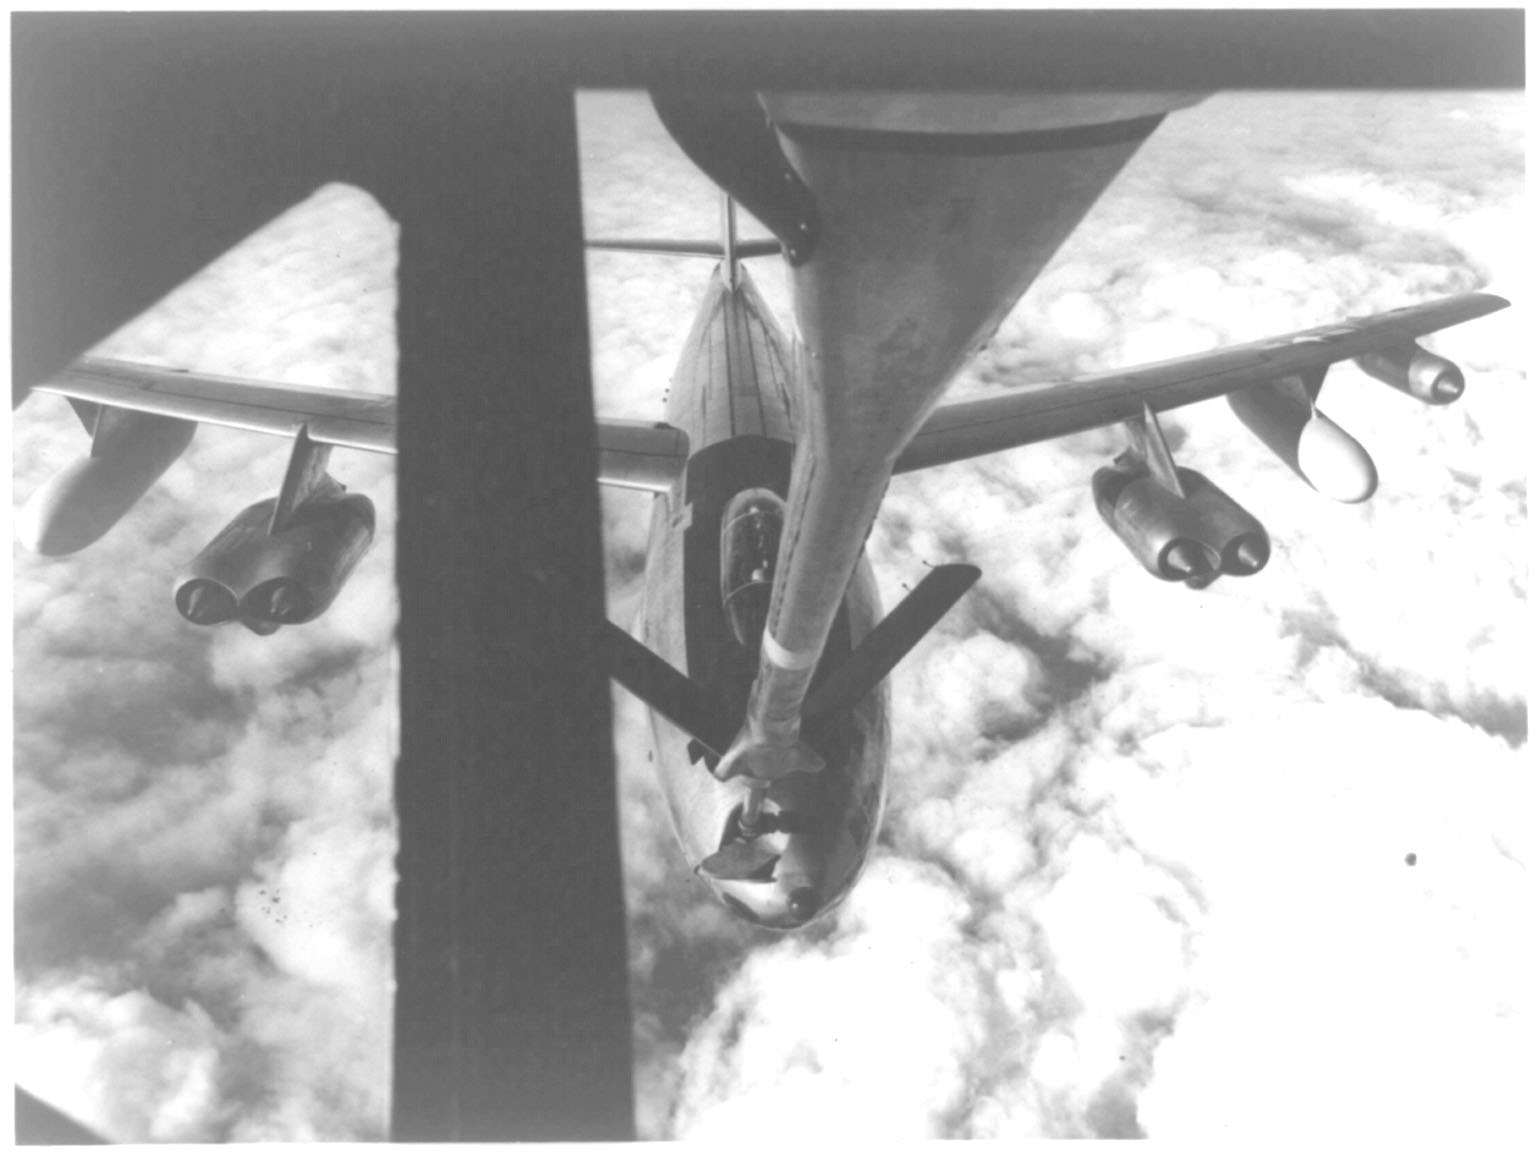 A B-47 Stratojet taking on a load of fuel. The B-47 Stratojet was the first jet-to-jet refueling tanker.
